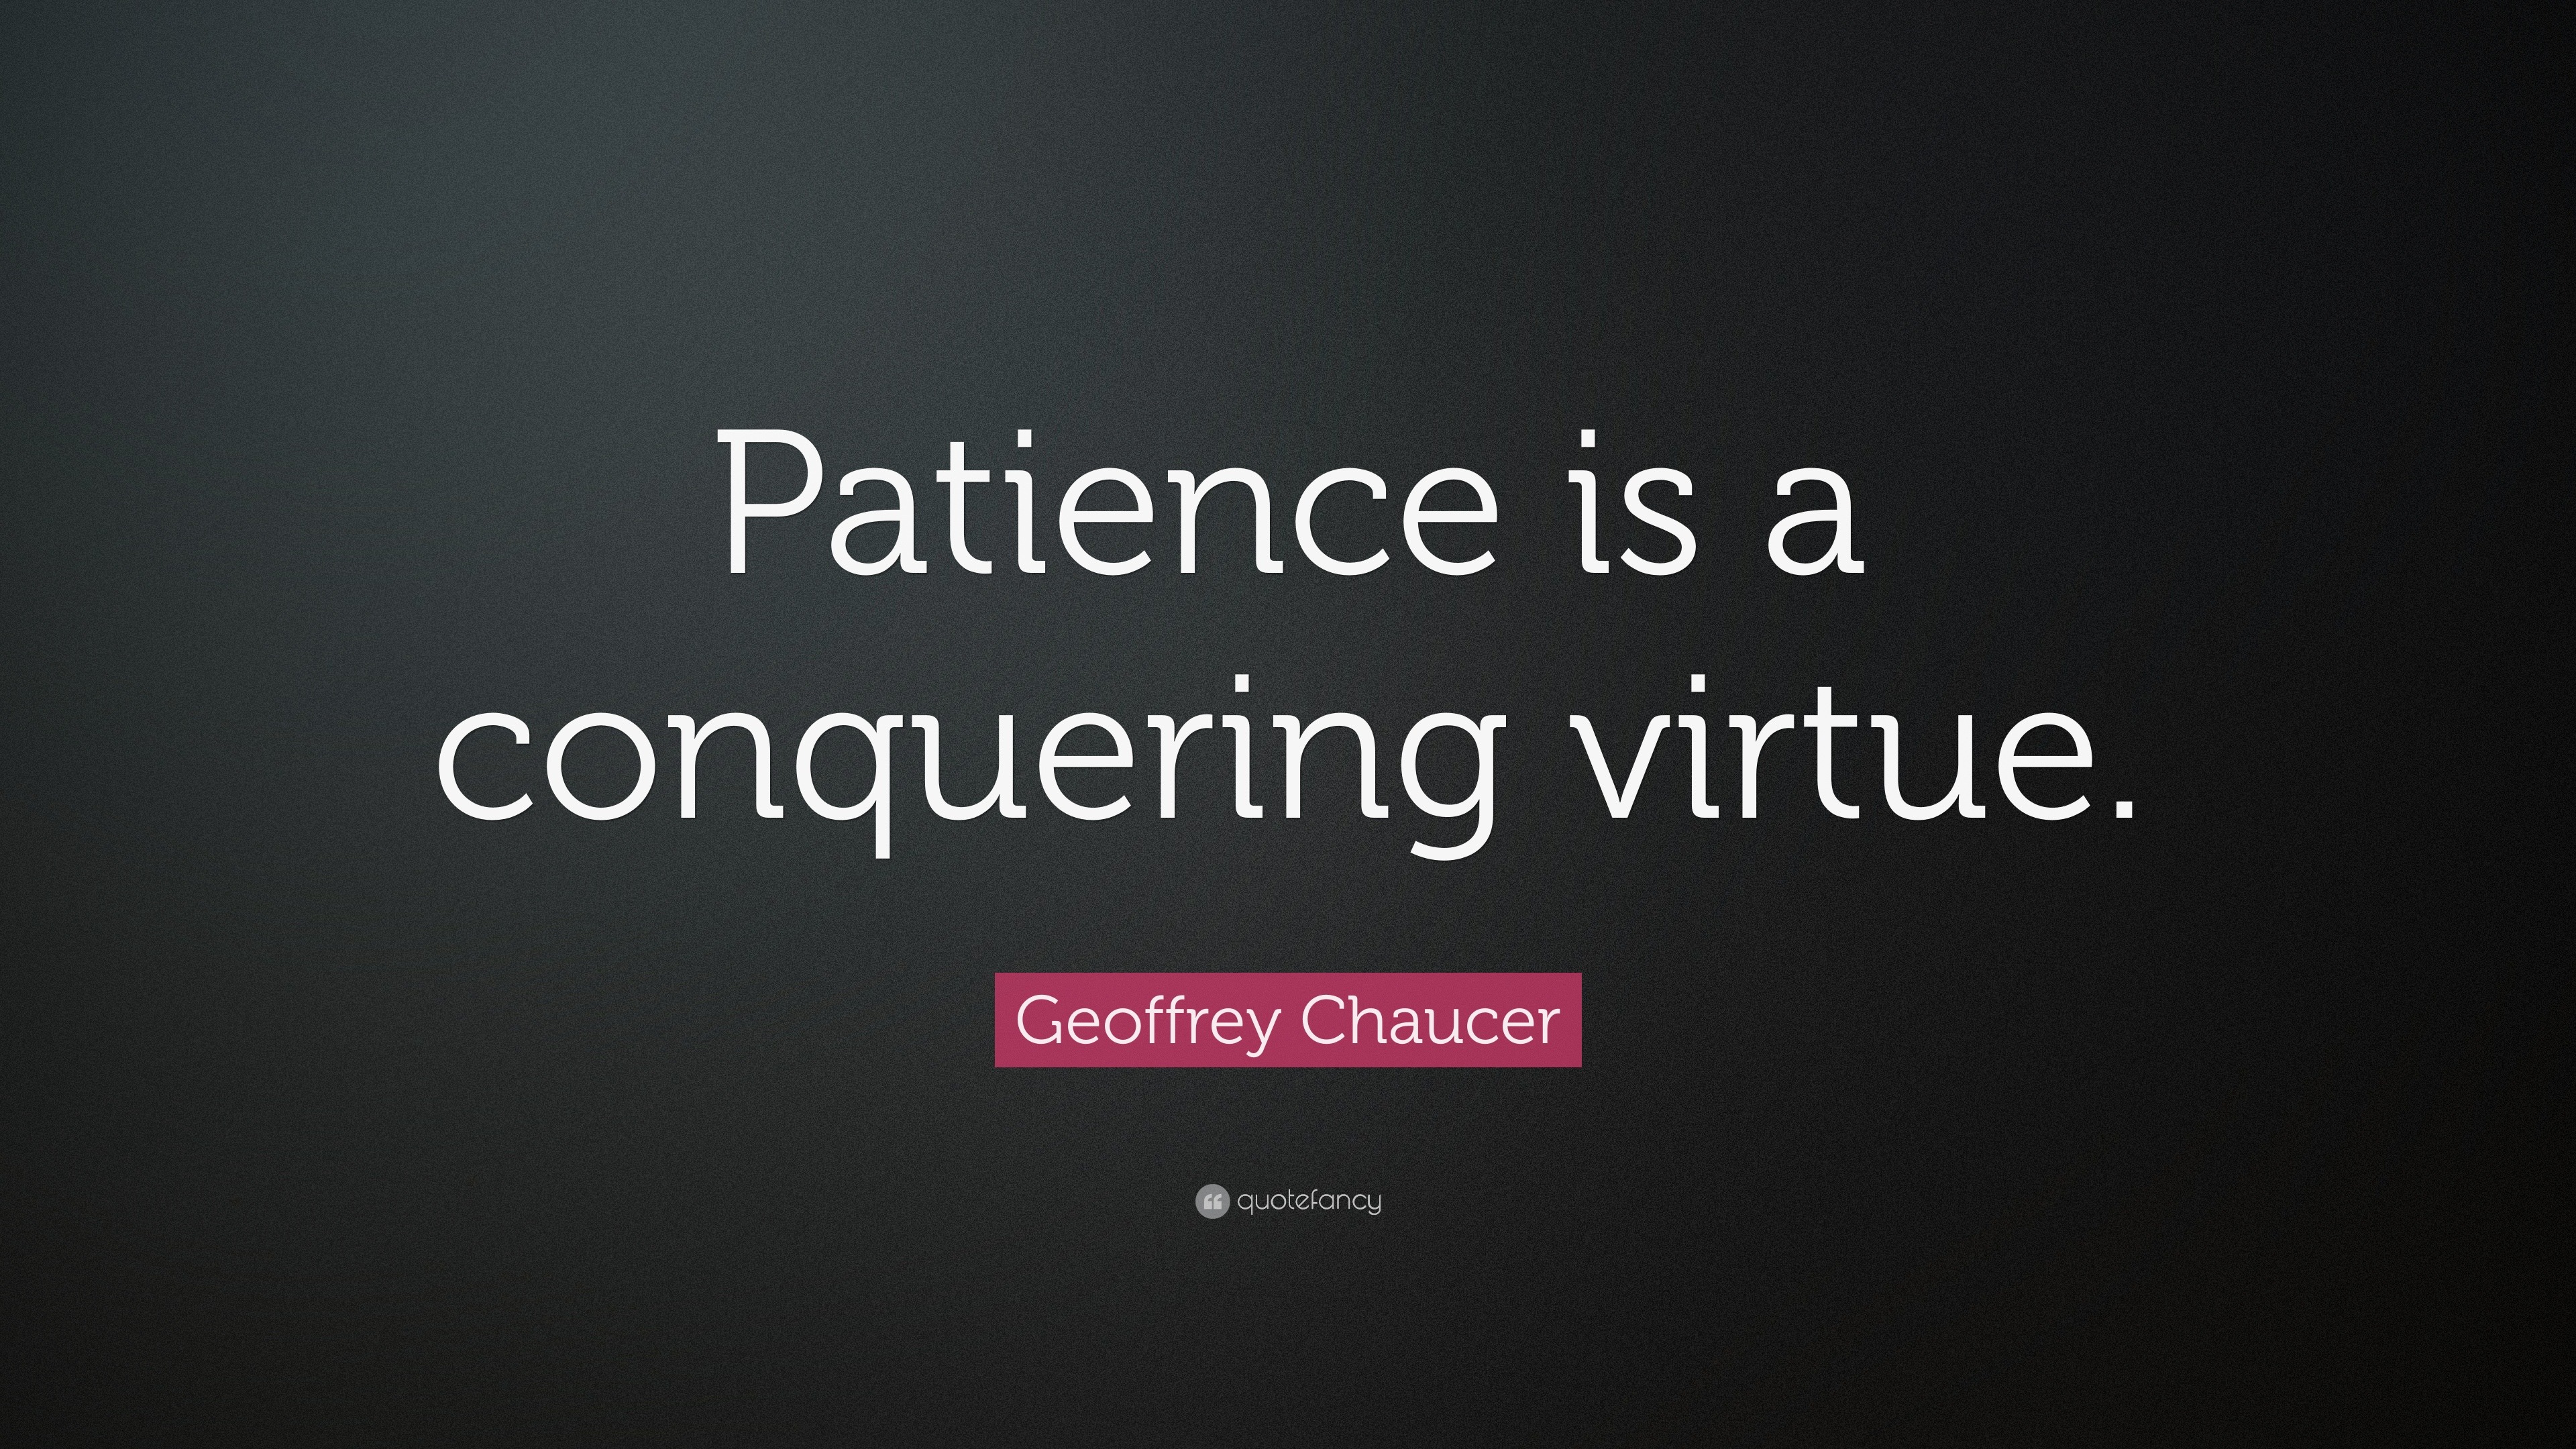 Geoffrey Chaucer Quote: “Patience is a conquering virtue.” (22 ...